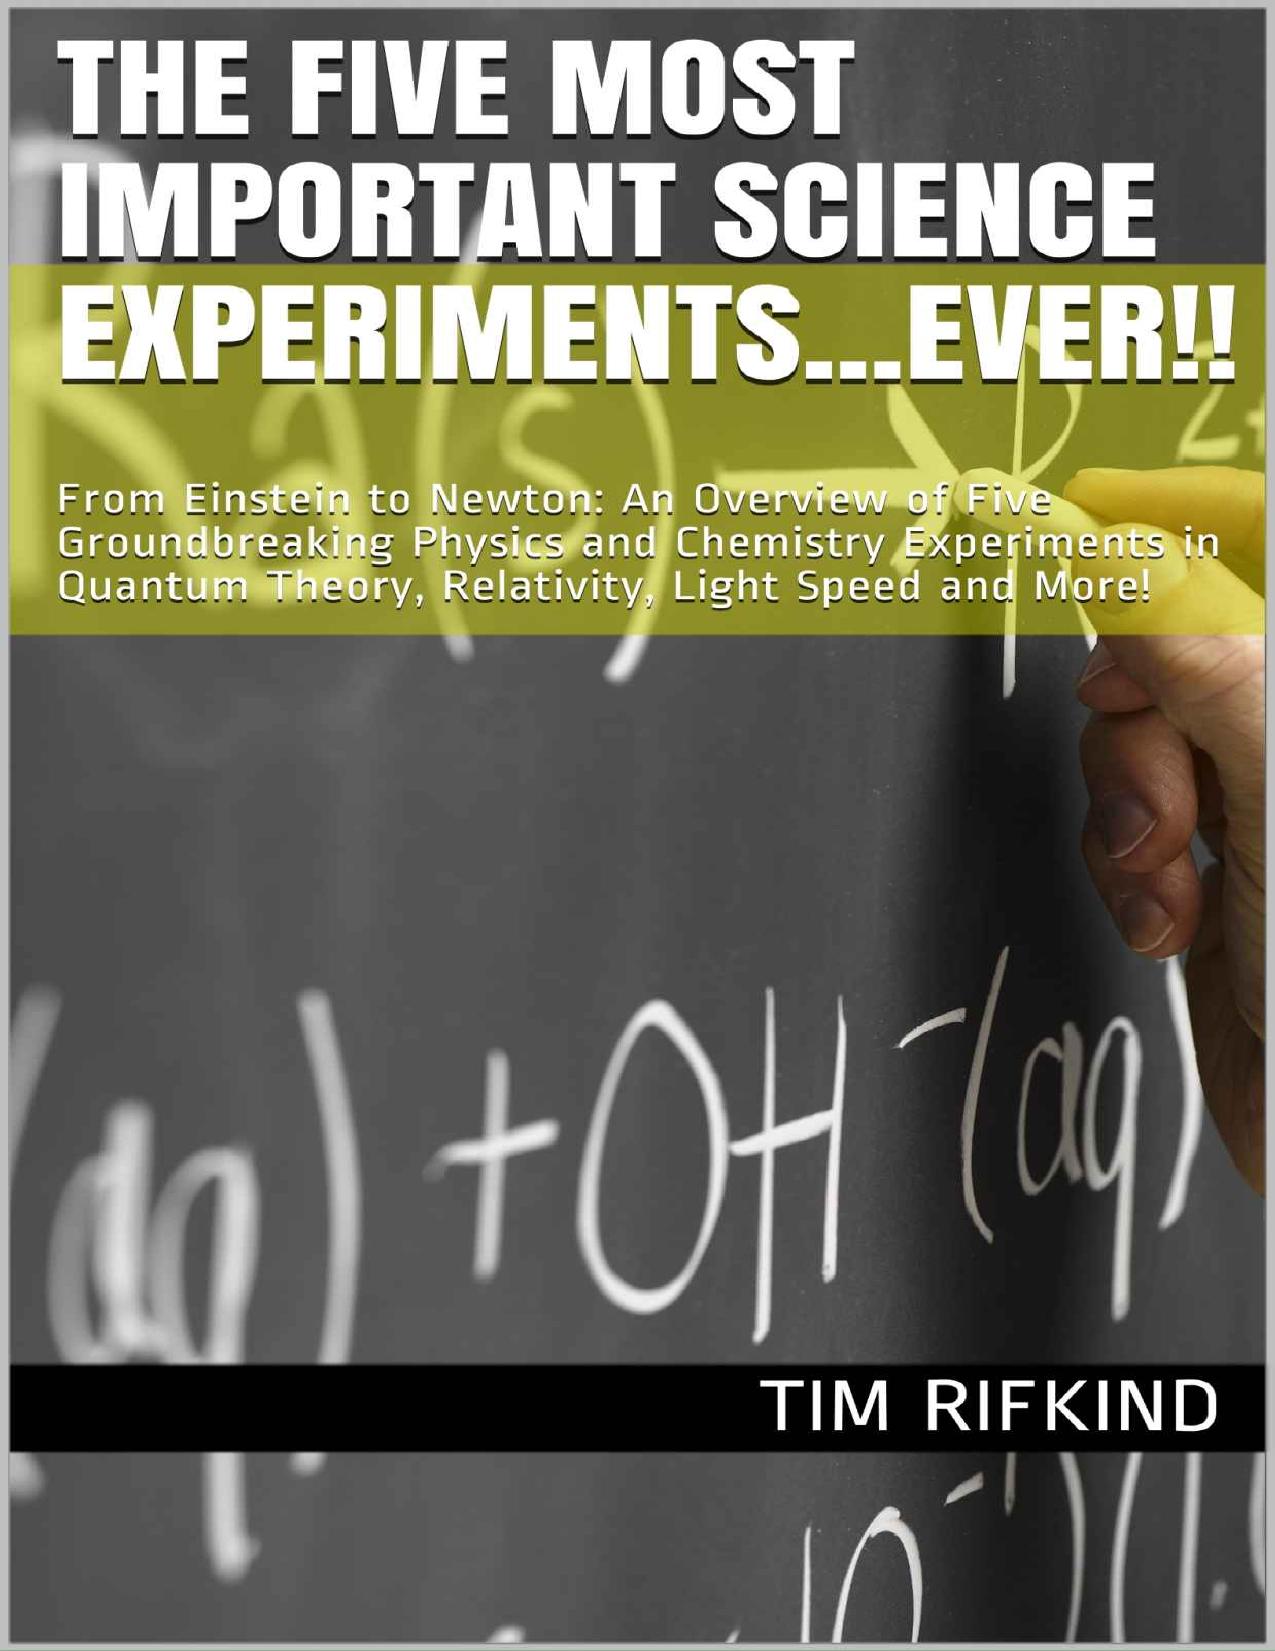 The Five Most Important Science Experiments...Ever!!: From Einstein to Newton: An Overview of Five Groundbreaking Physics and Chemistry Experiments in ... Theory, Relativity, Light Speed and More! by Tim Rifkind